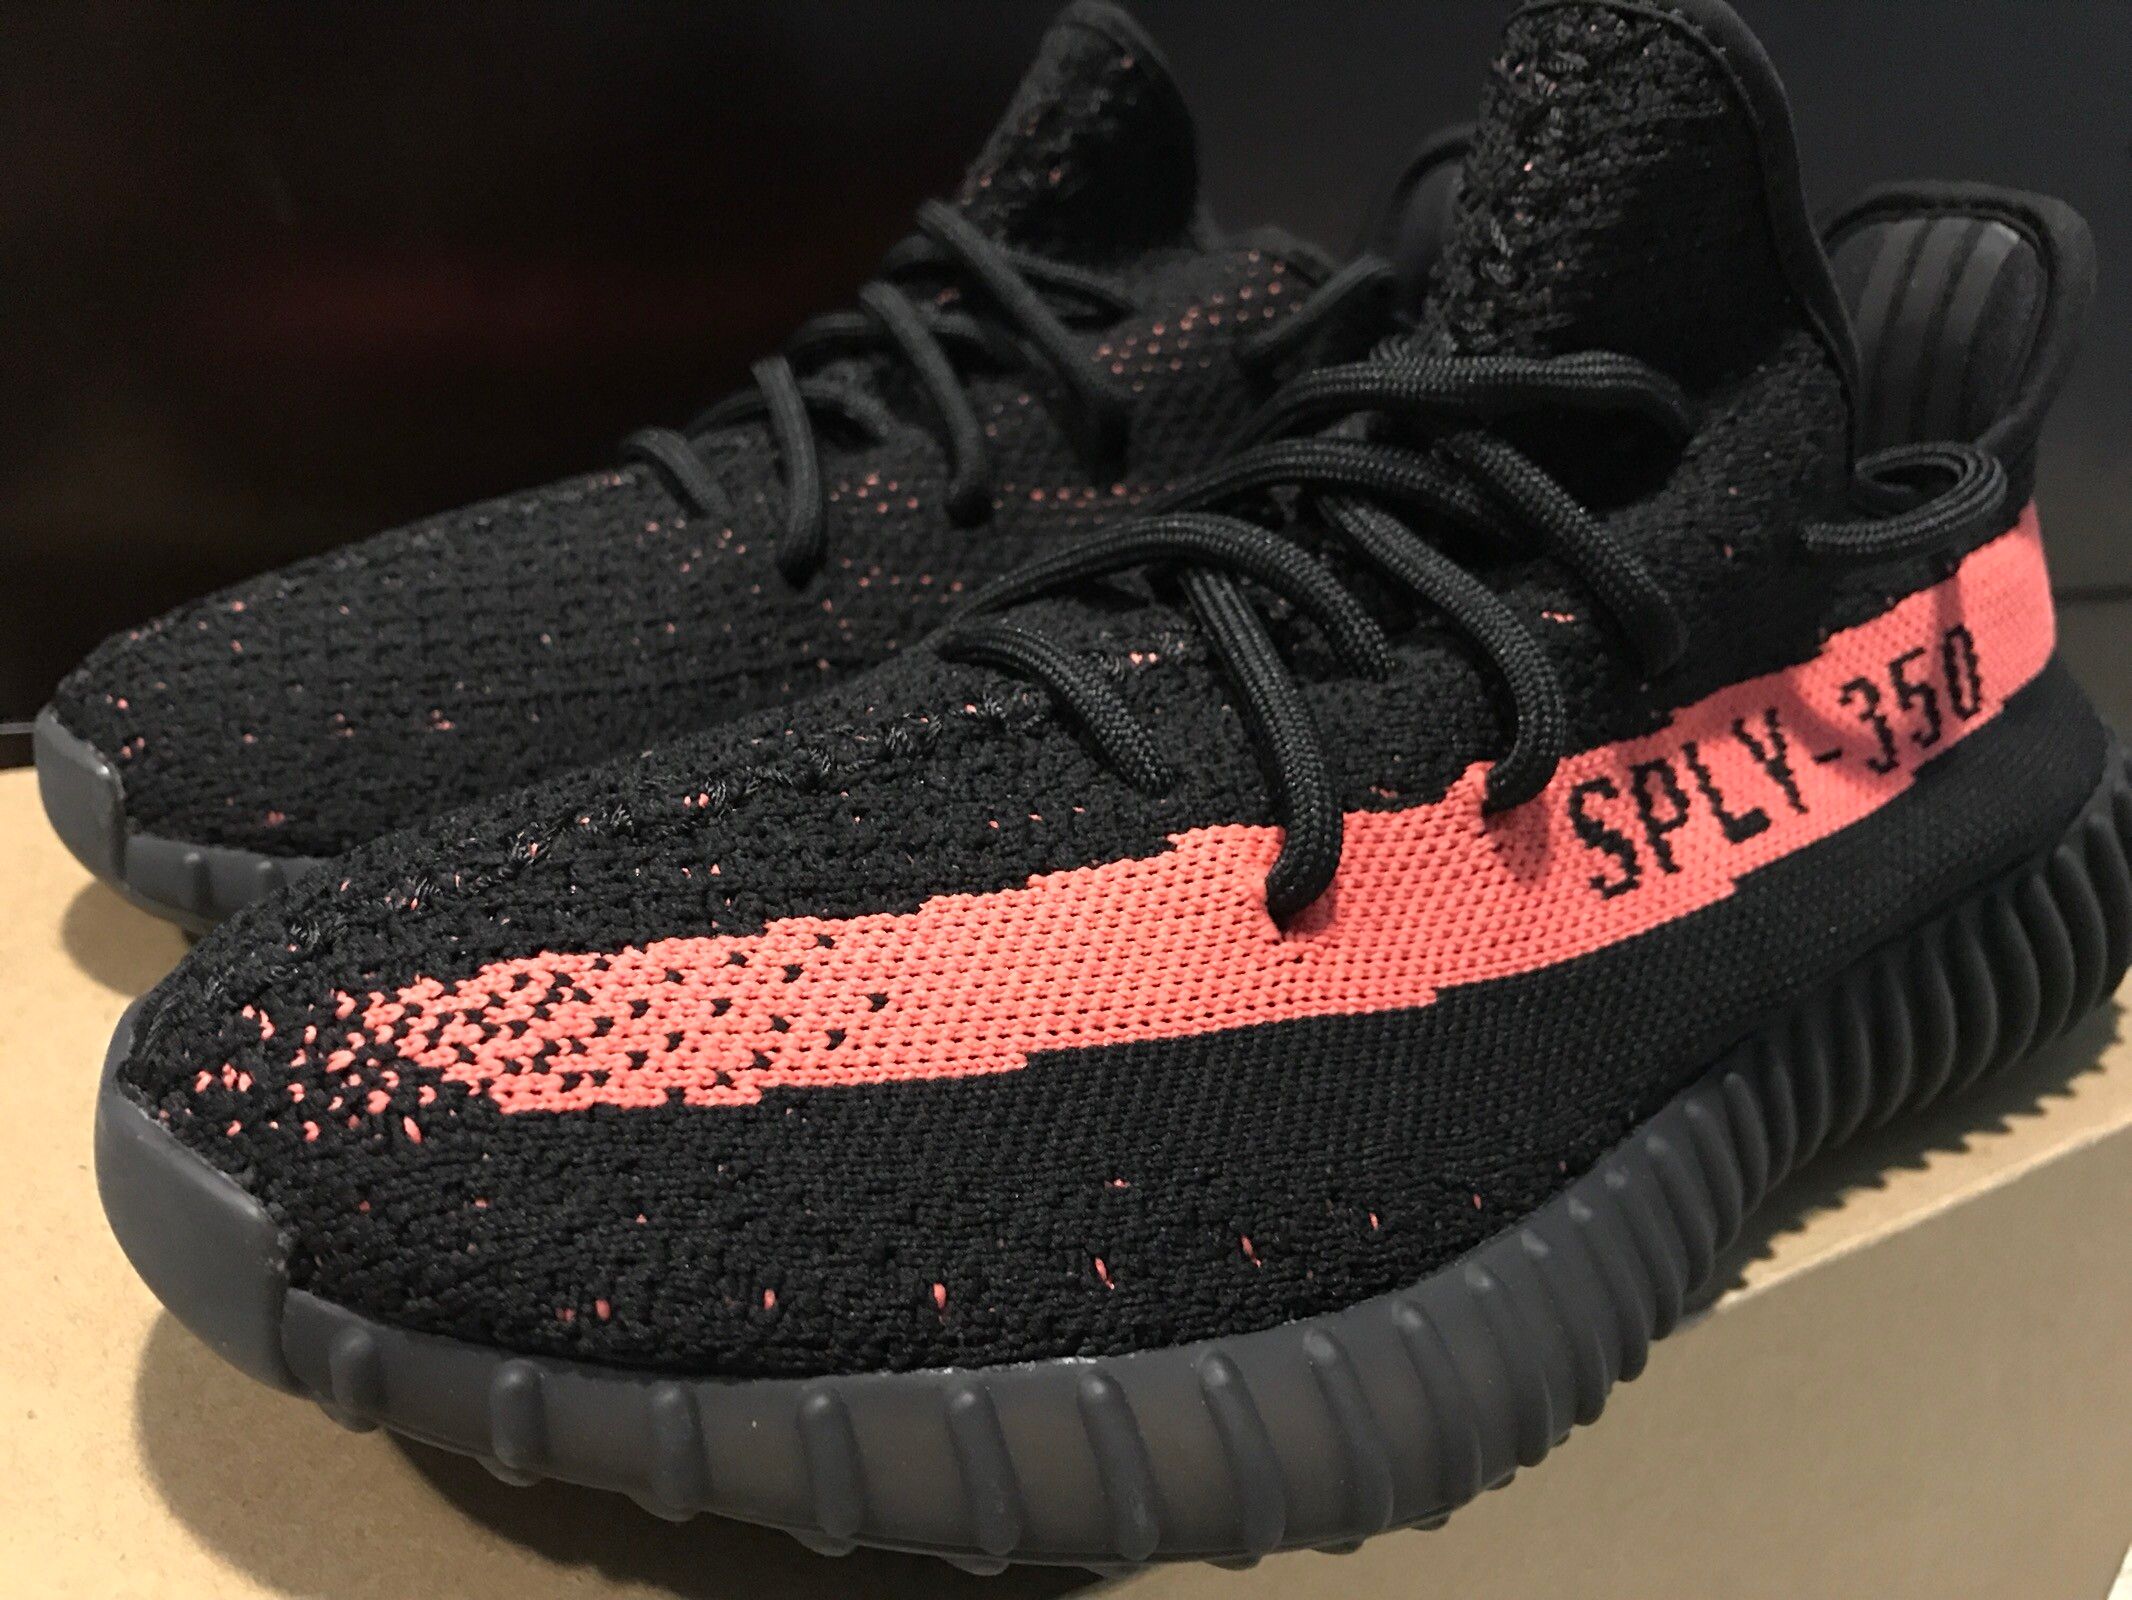 Adidas Adidas Yeezy Boost 350 V2 Core Black Red Size US 8 / EU 41 - 1 Preview